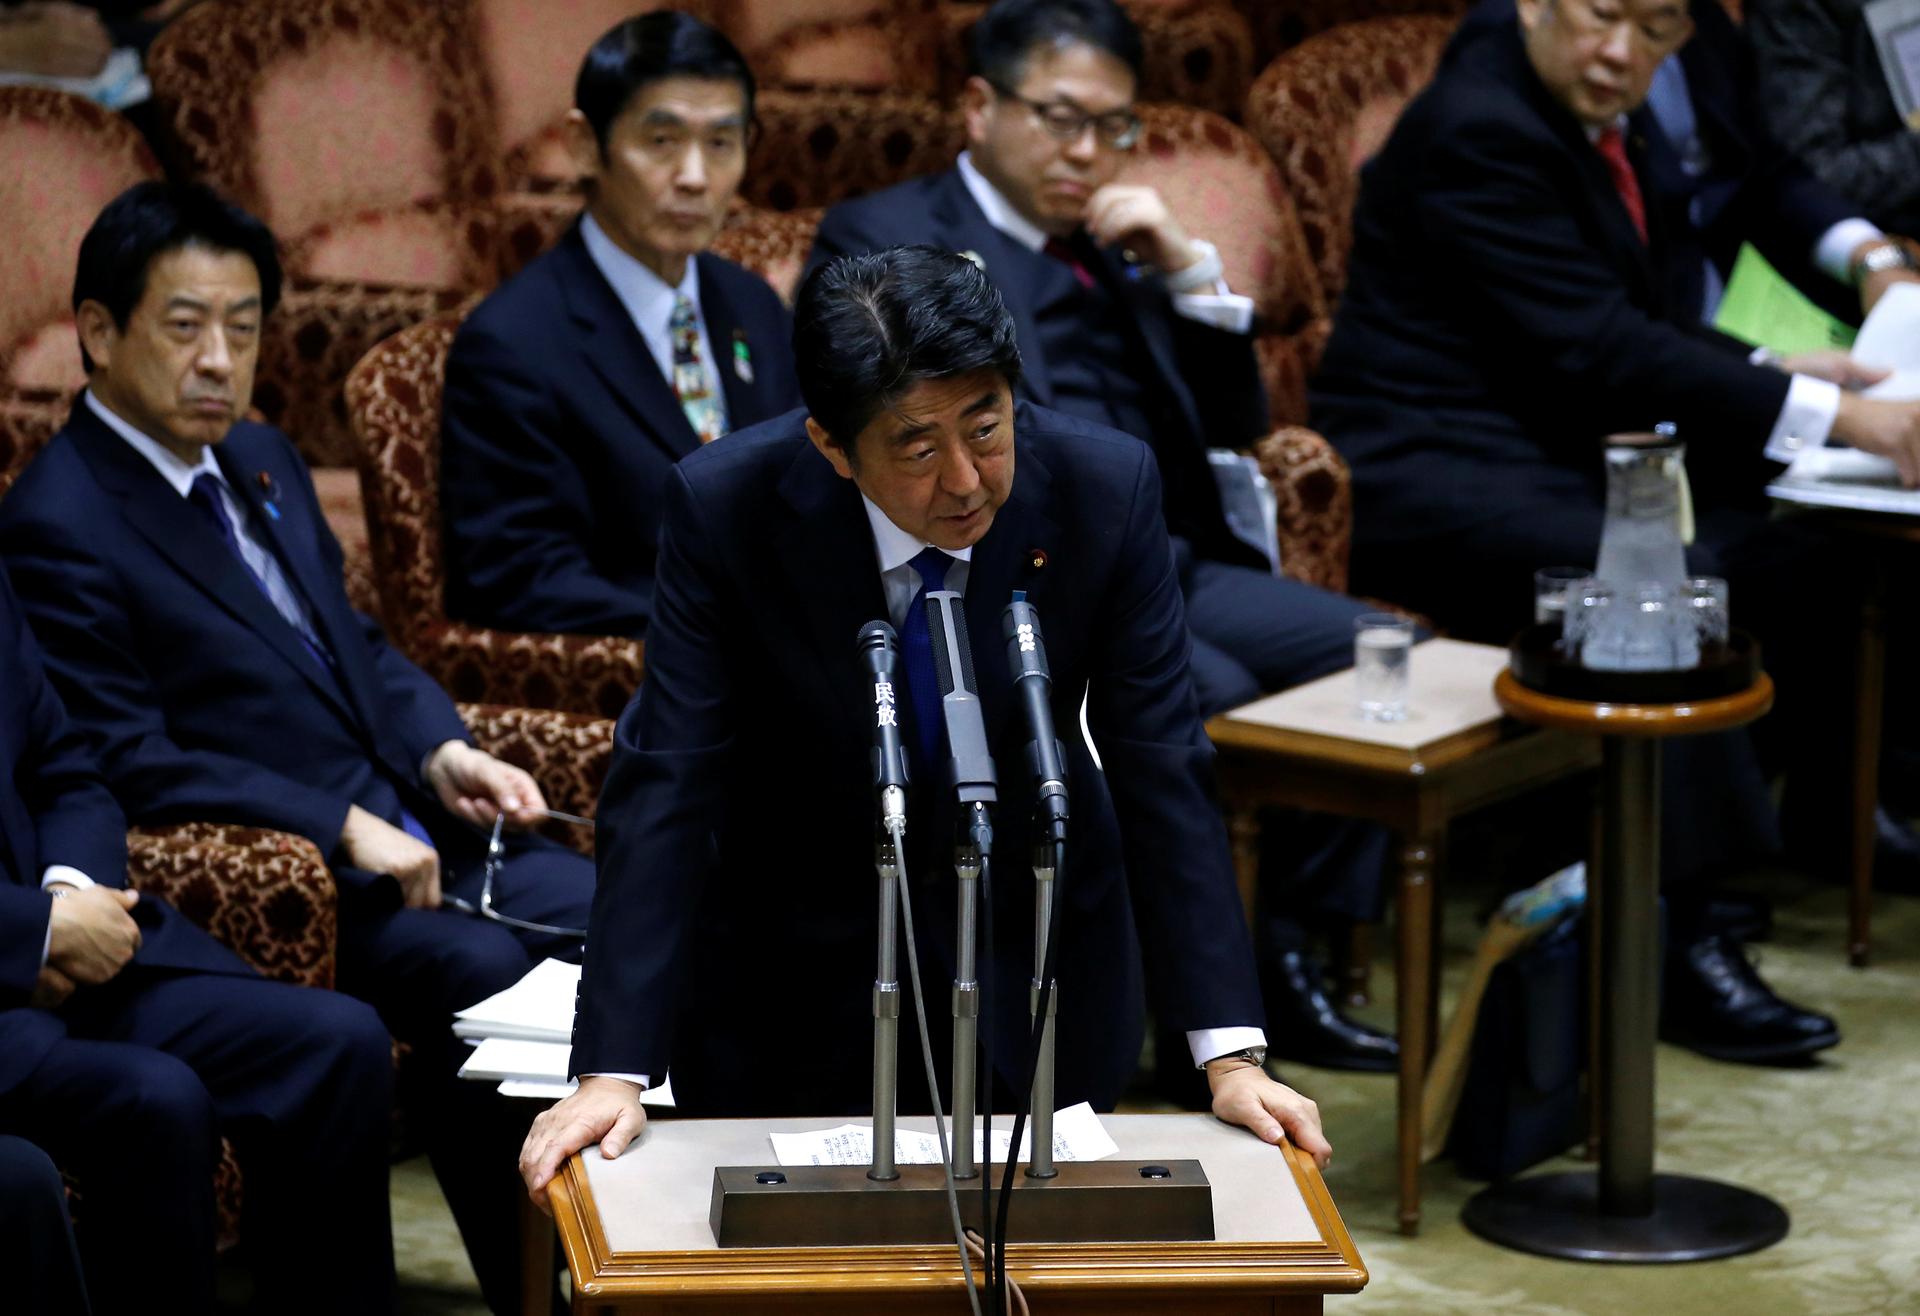 Japan's Prime Minister Shinzo Abe (C) speaks at the upper house parliamentary session after reports on North Korea's missile launches, in Tokyo, Japan, March 6, 2017.